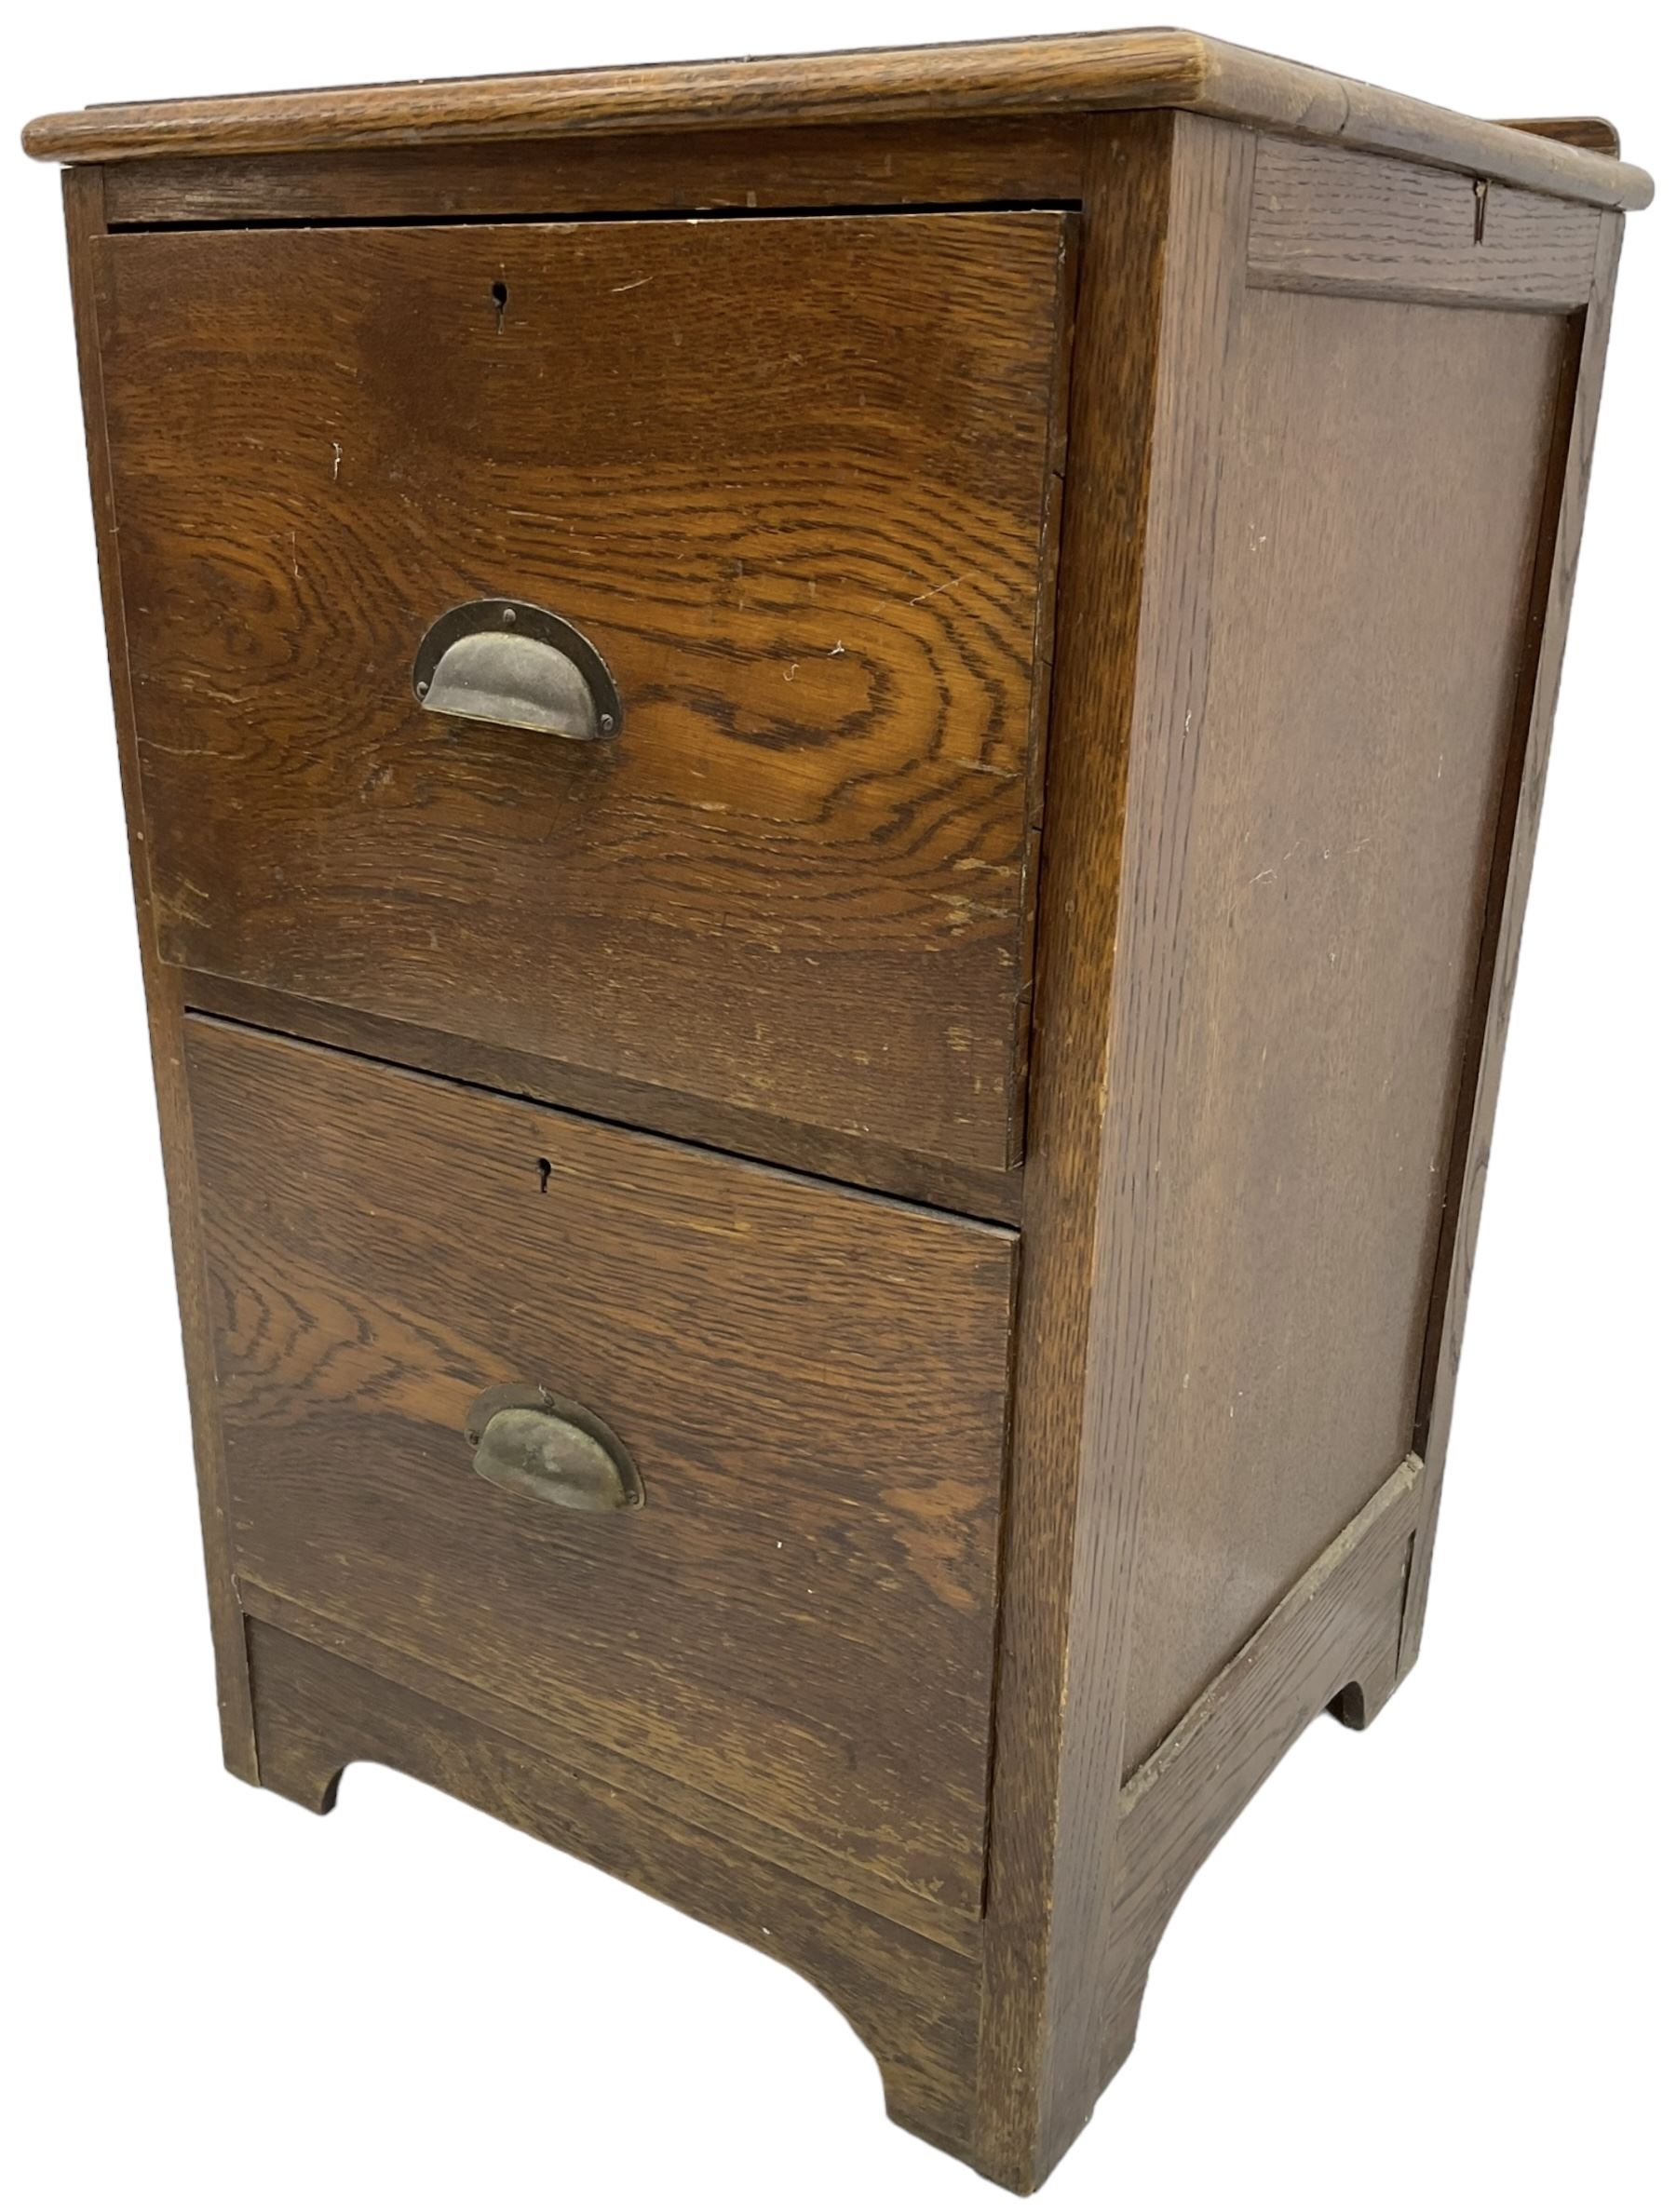 Early 20th century oak two drawer filing cabinet - Image 3 of 5